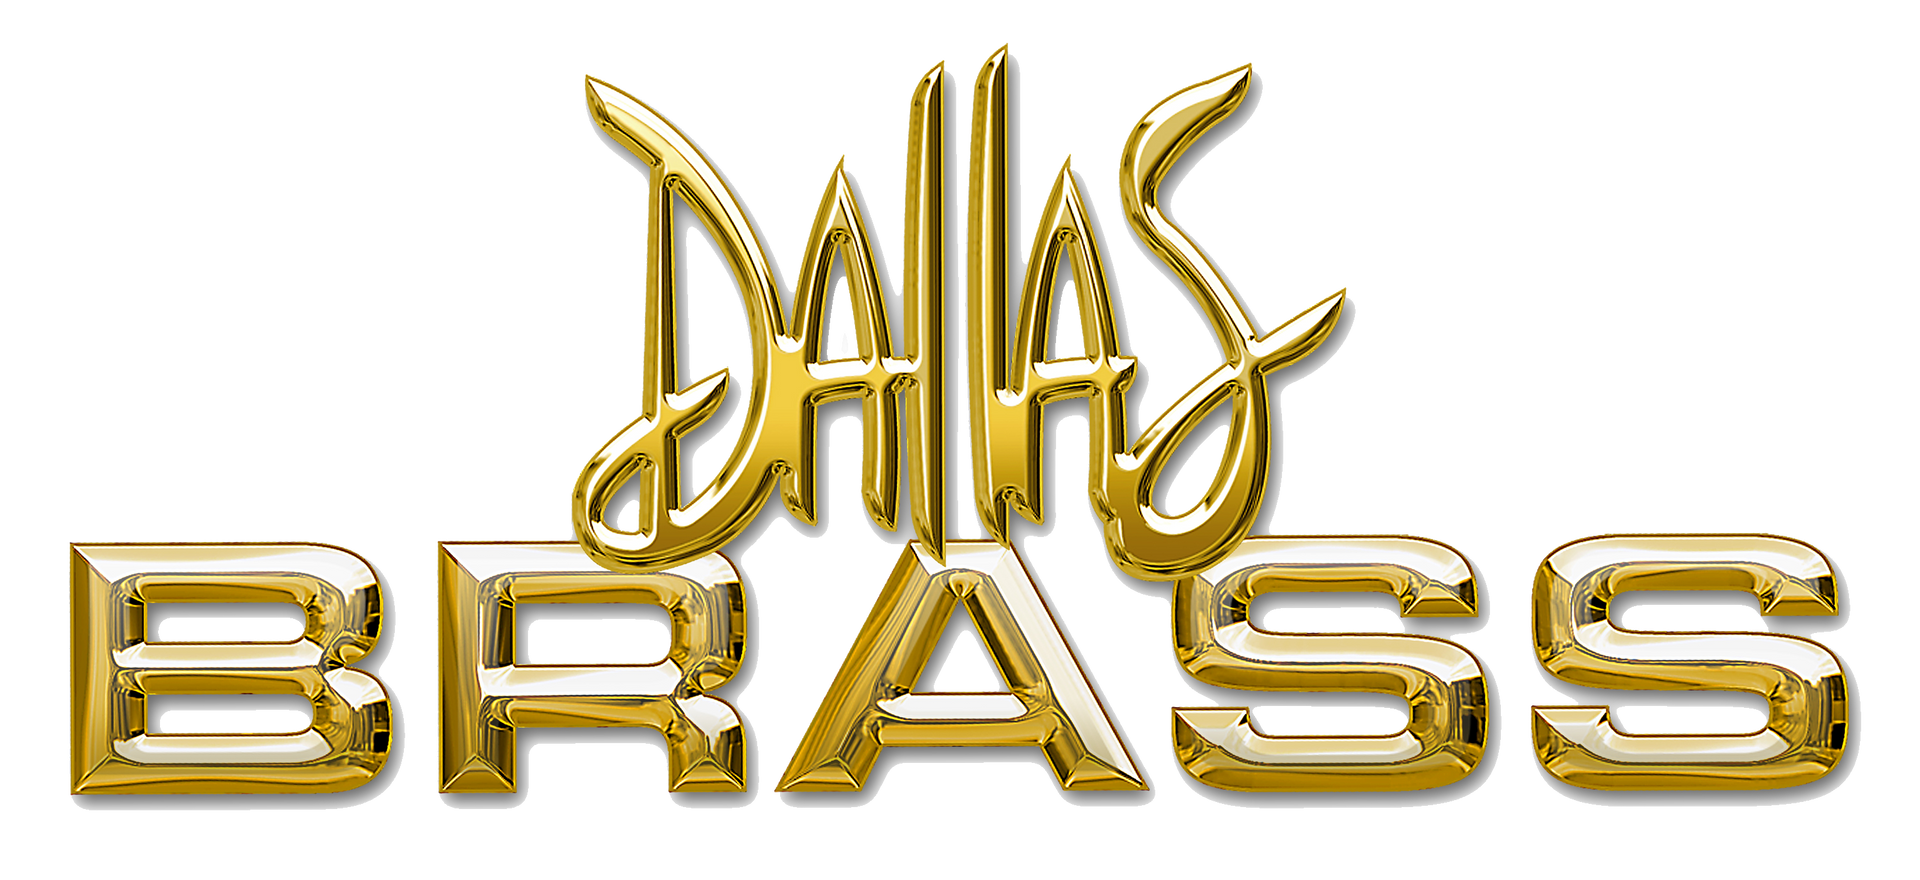 The Dallas Brass: Helping Students Switch to Tuba - MakeMusic